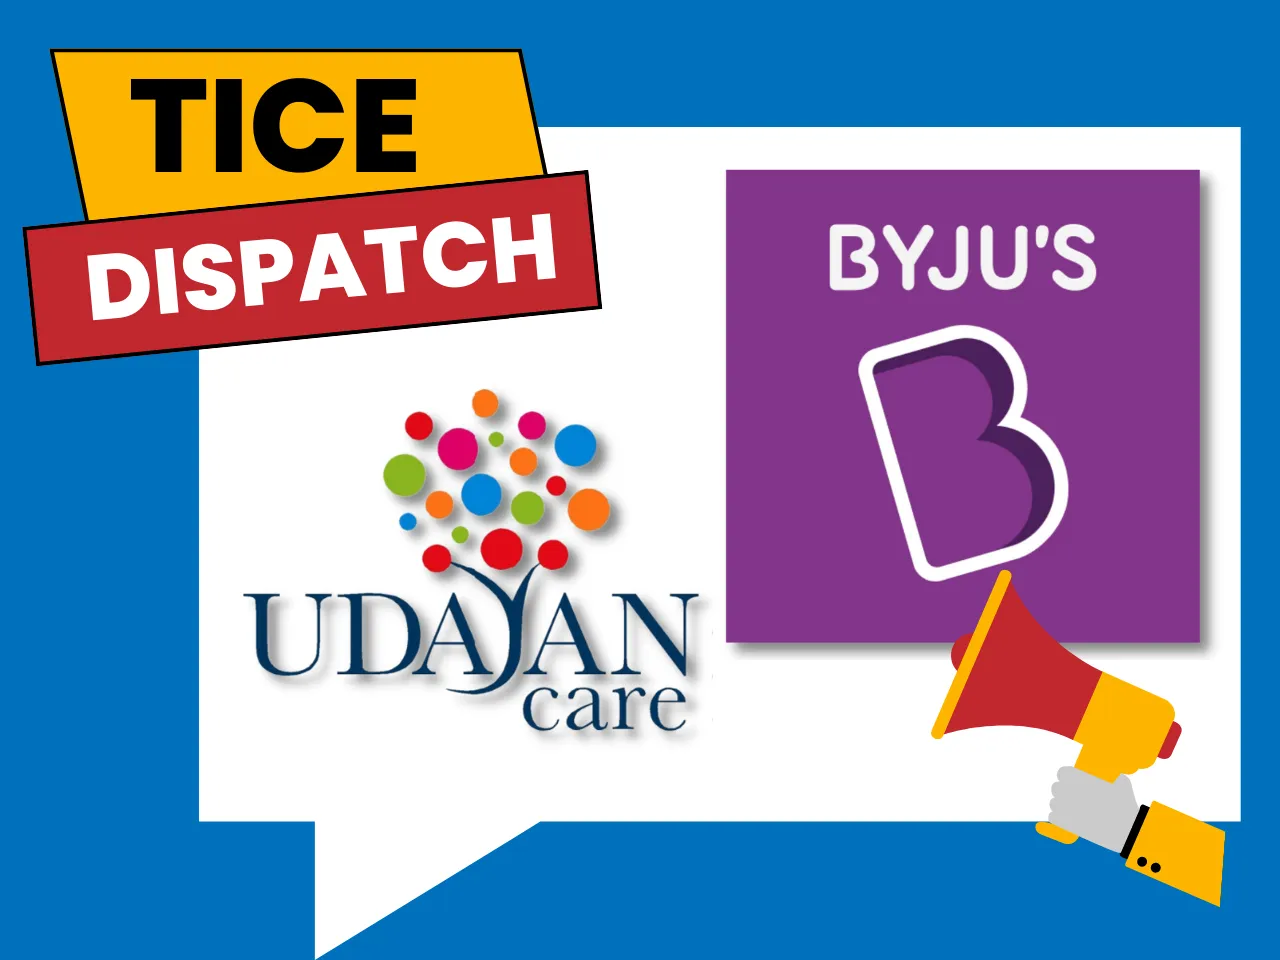 BYJU’S and Udayan Care to impart quality learning to children from underserved communities